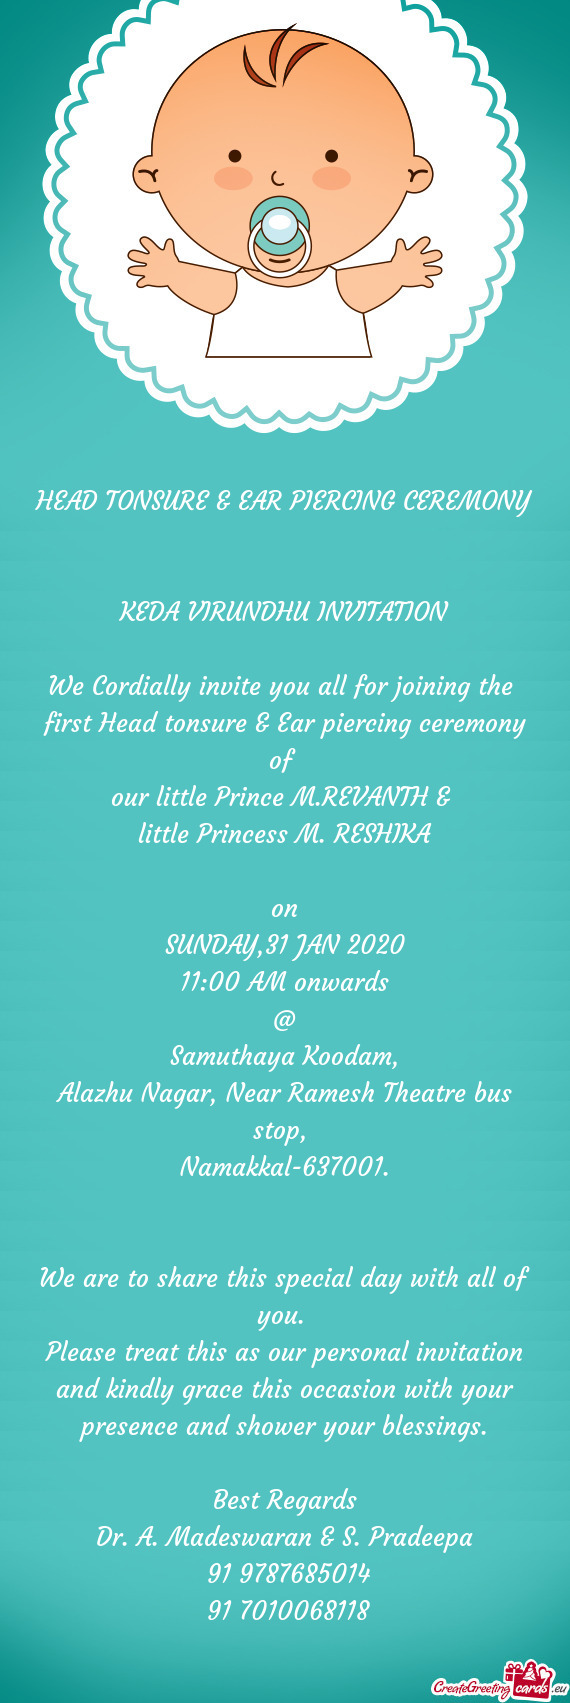 We Cordially invite you all for joining the